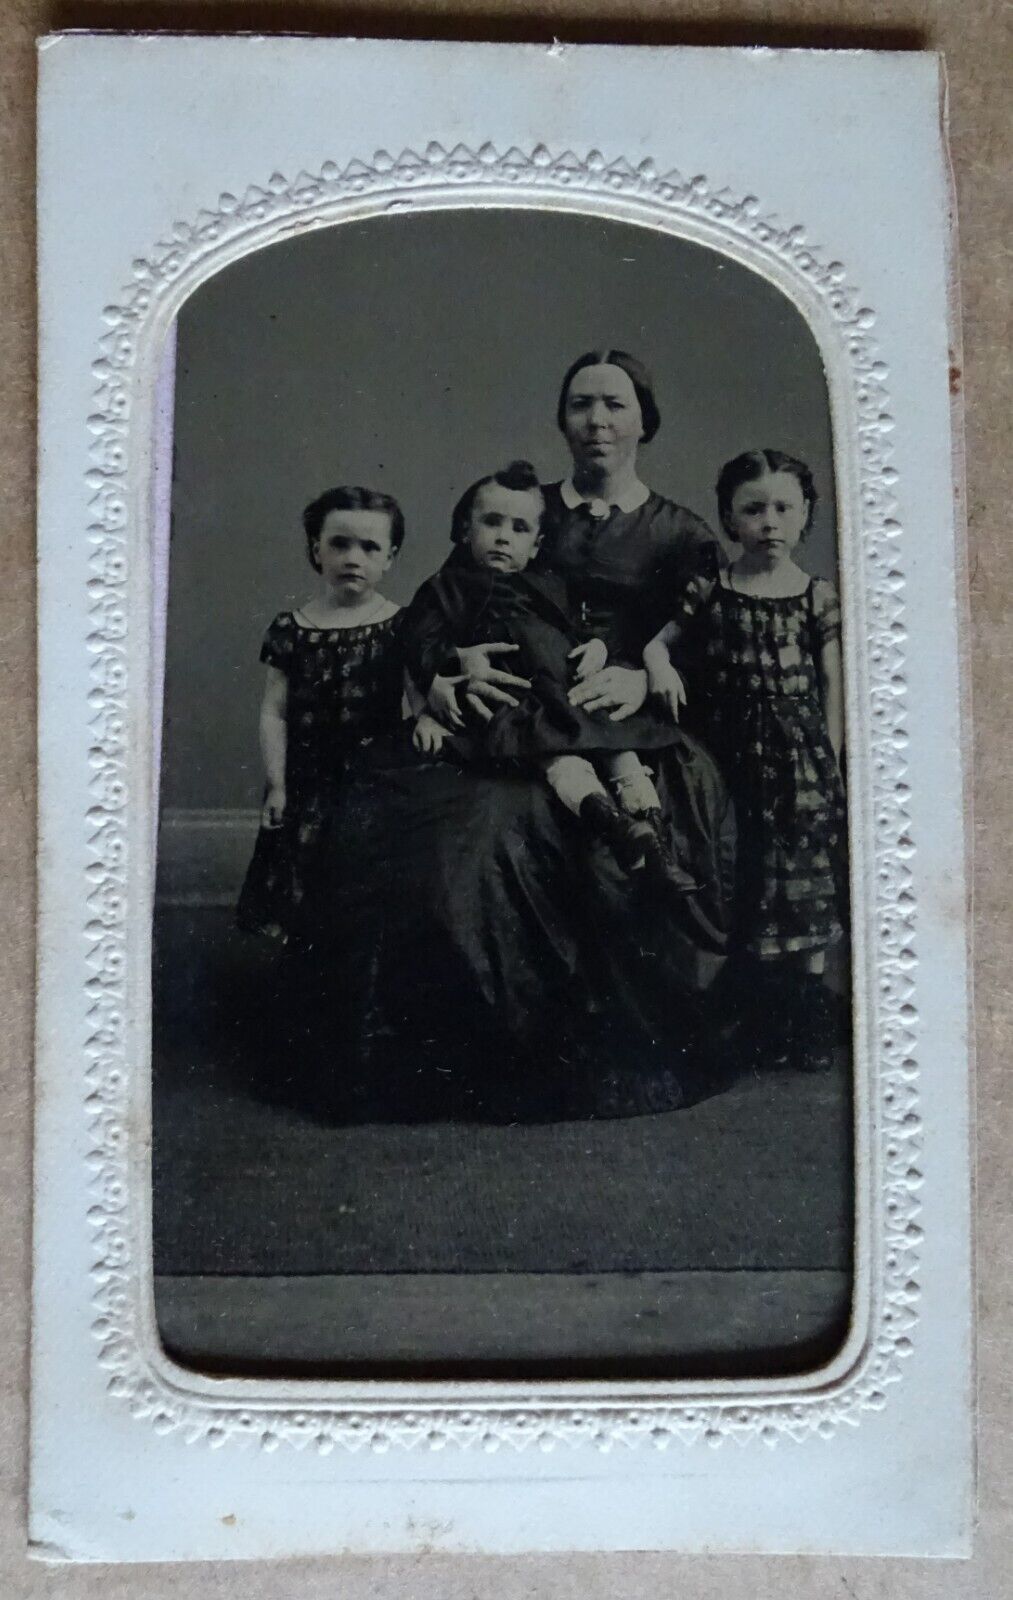 Tintype Photograph of the Powers Family (from Boston/New Hampshire area) tinted